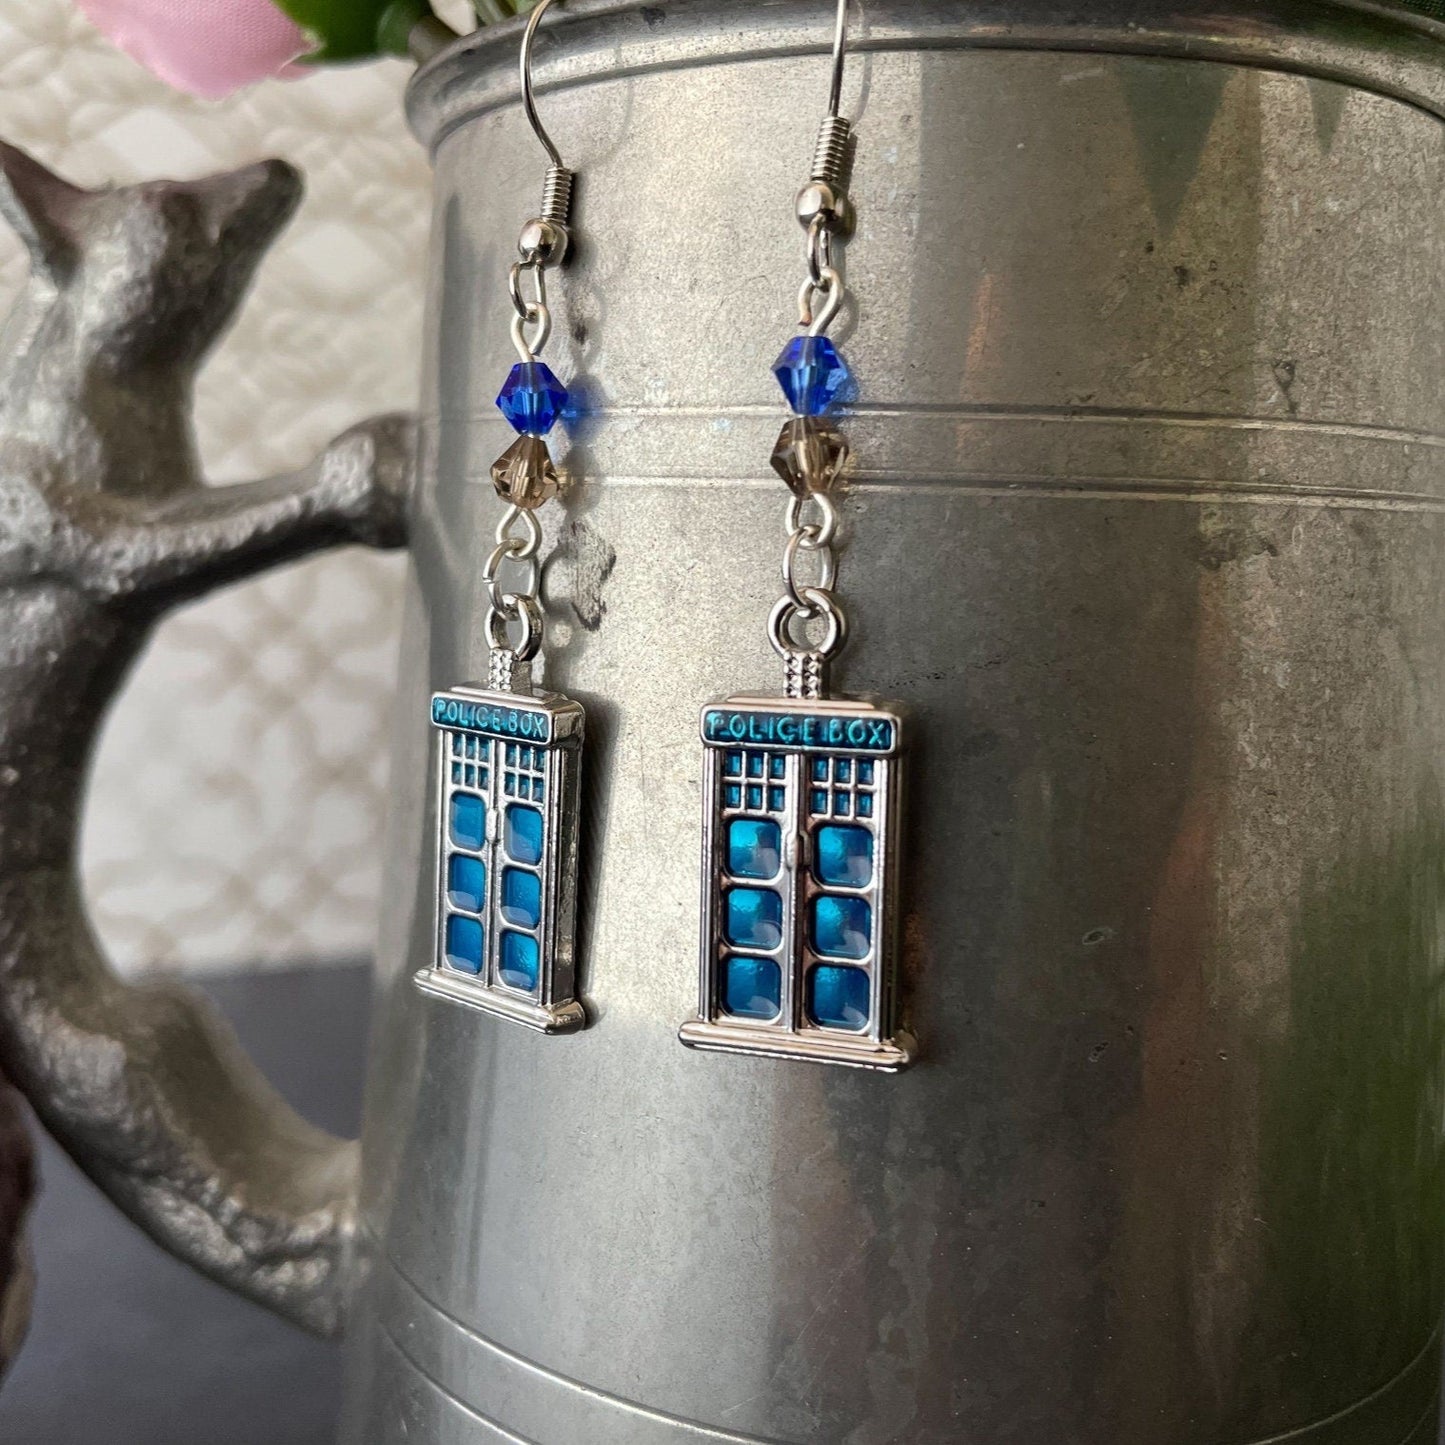 Doctor Who Police Box Enamel and Bead Earrings - Smoke and Blue